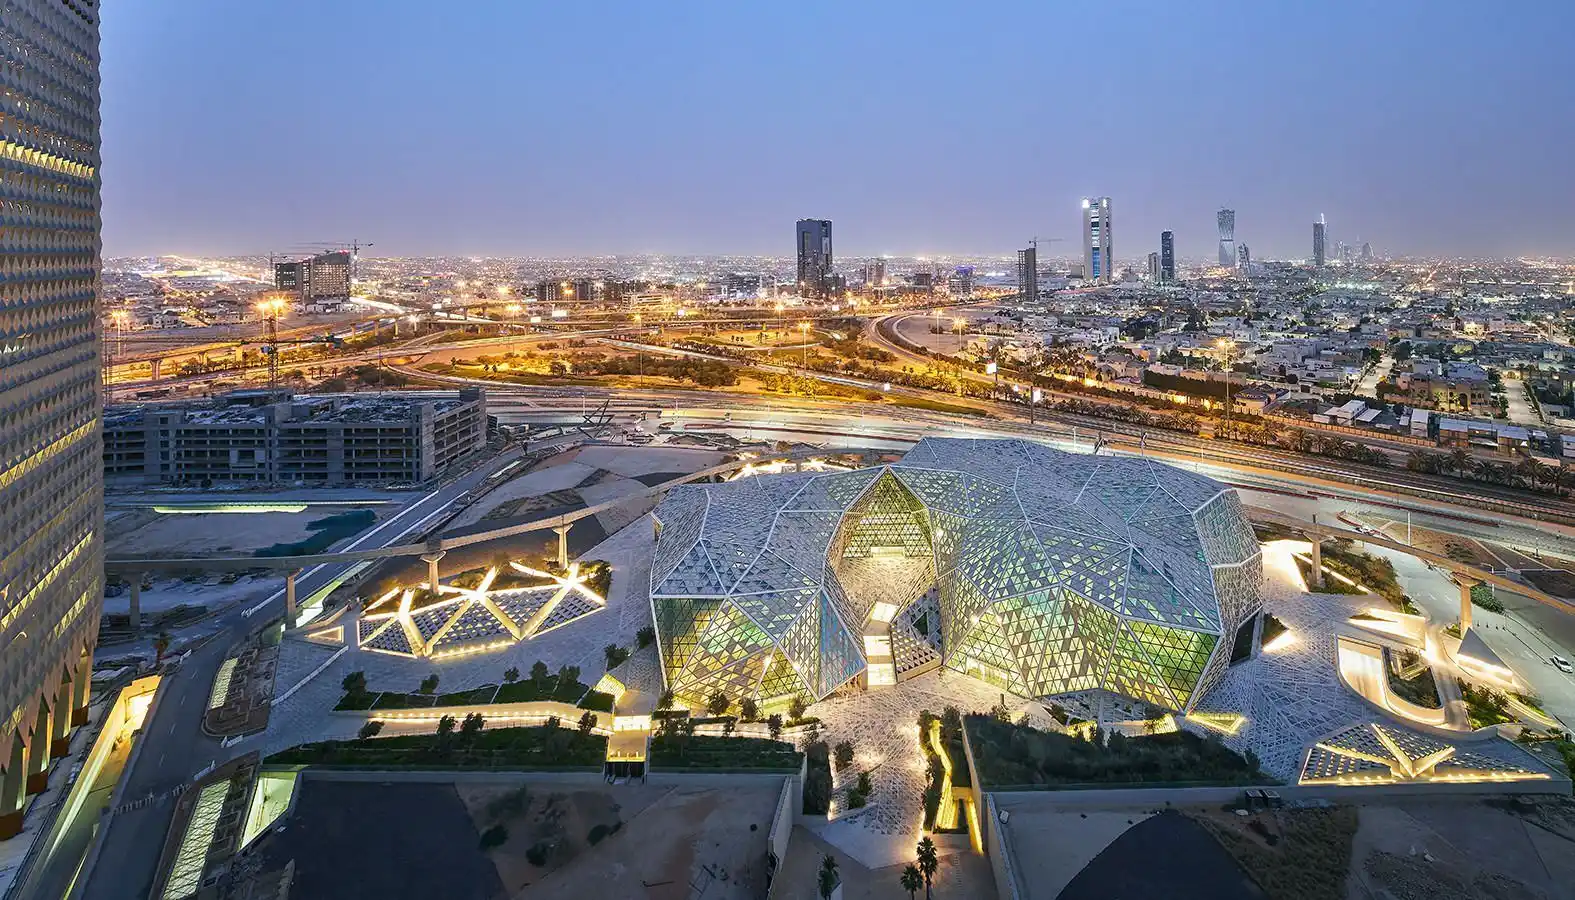 Fascinating And Famous Spots Of Riyadh That Capture The Soul